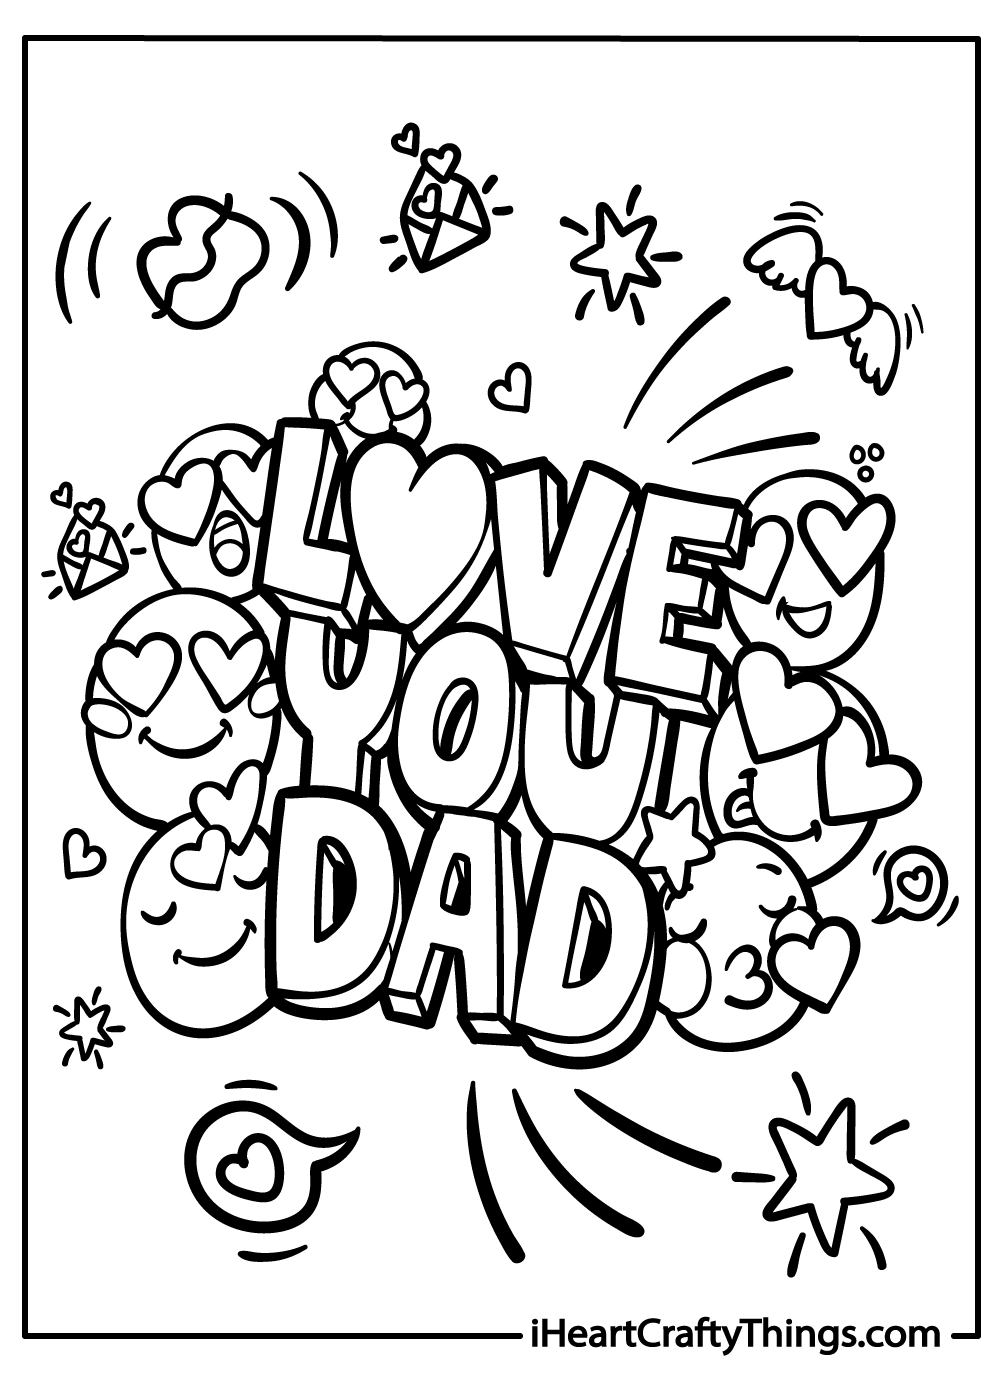 love you dad coloring sheet for kids